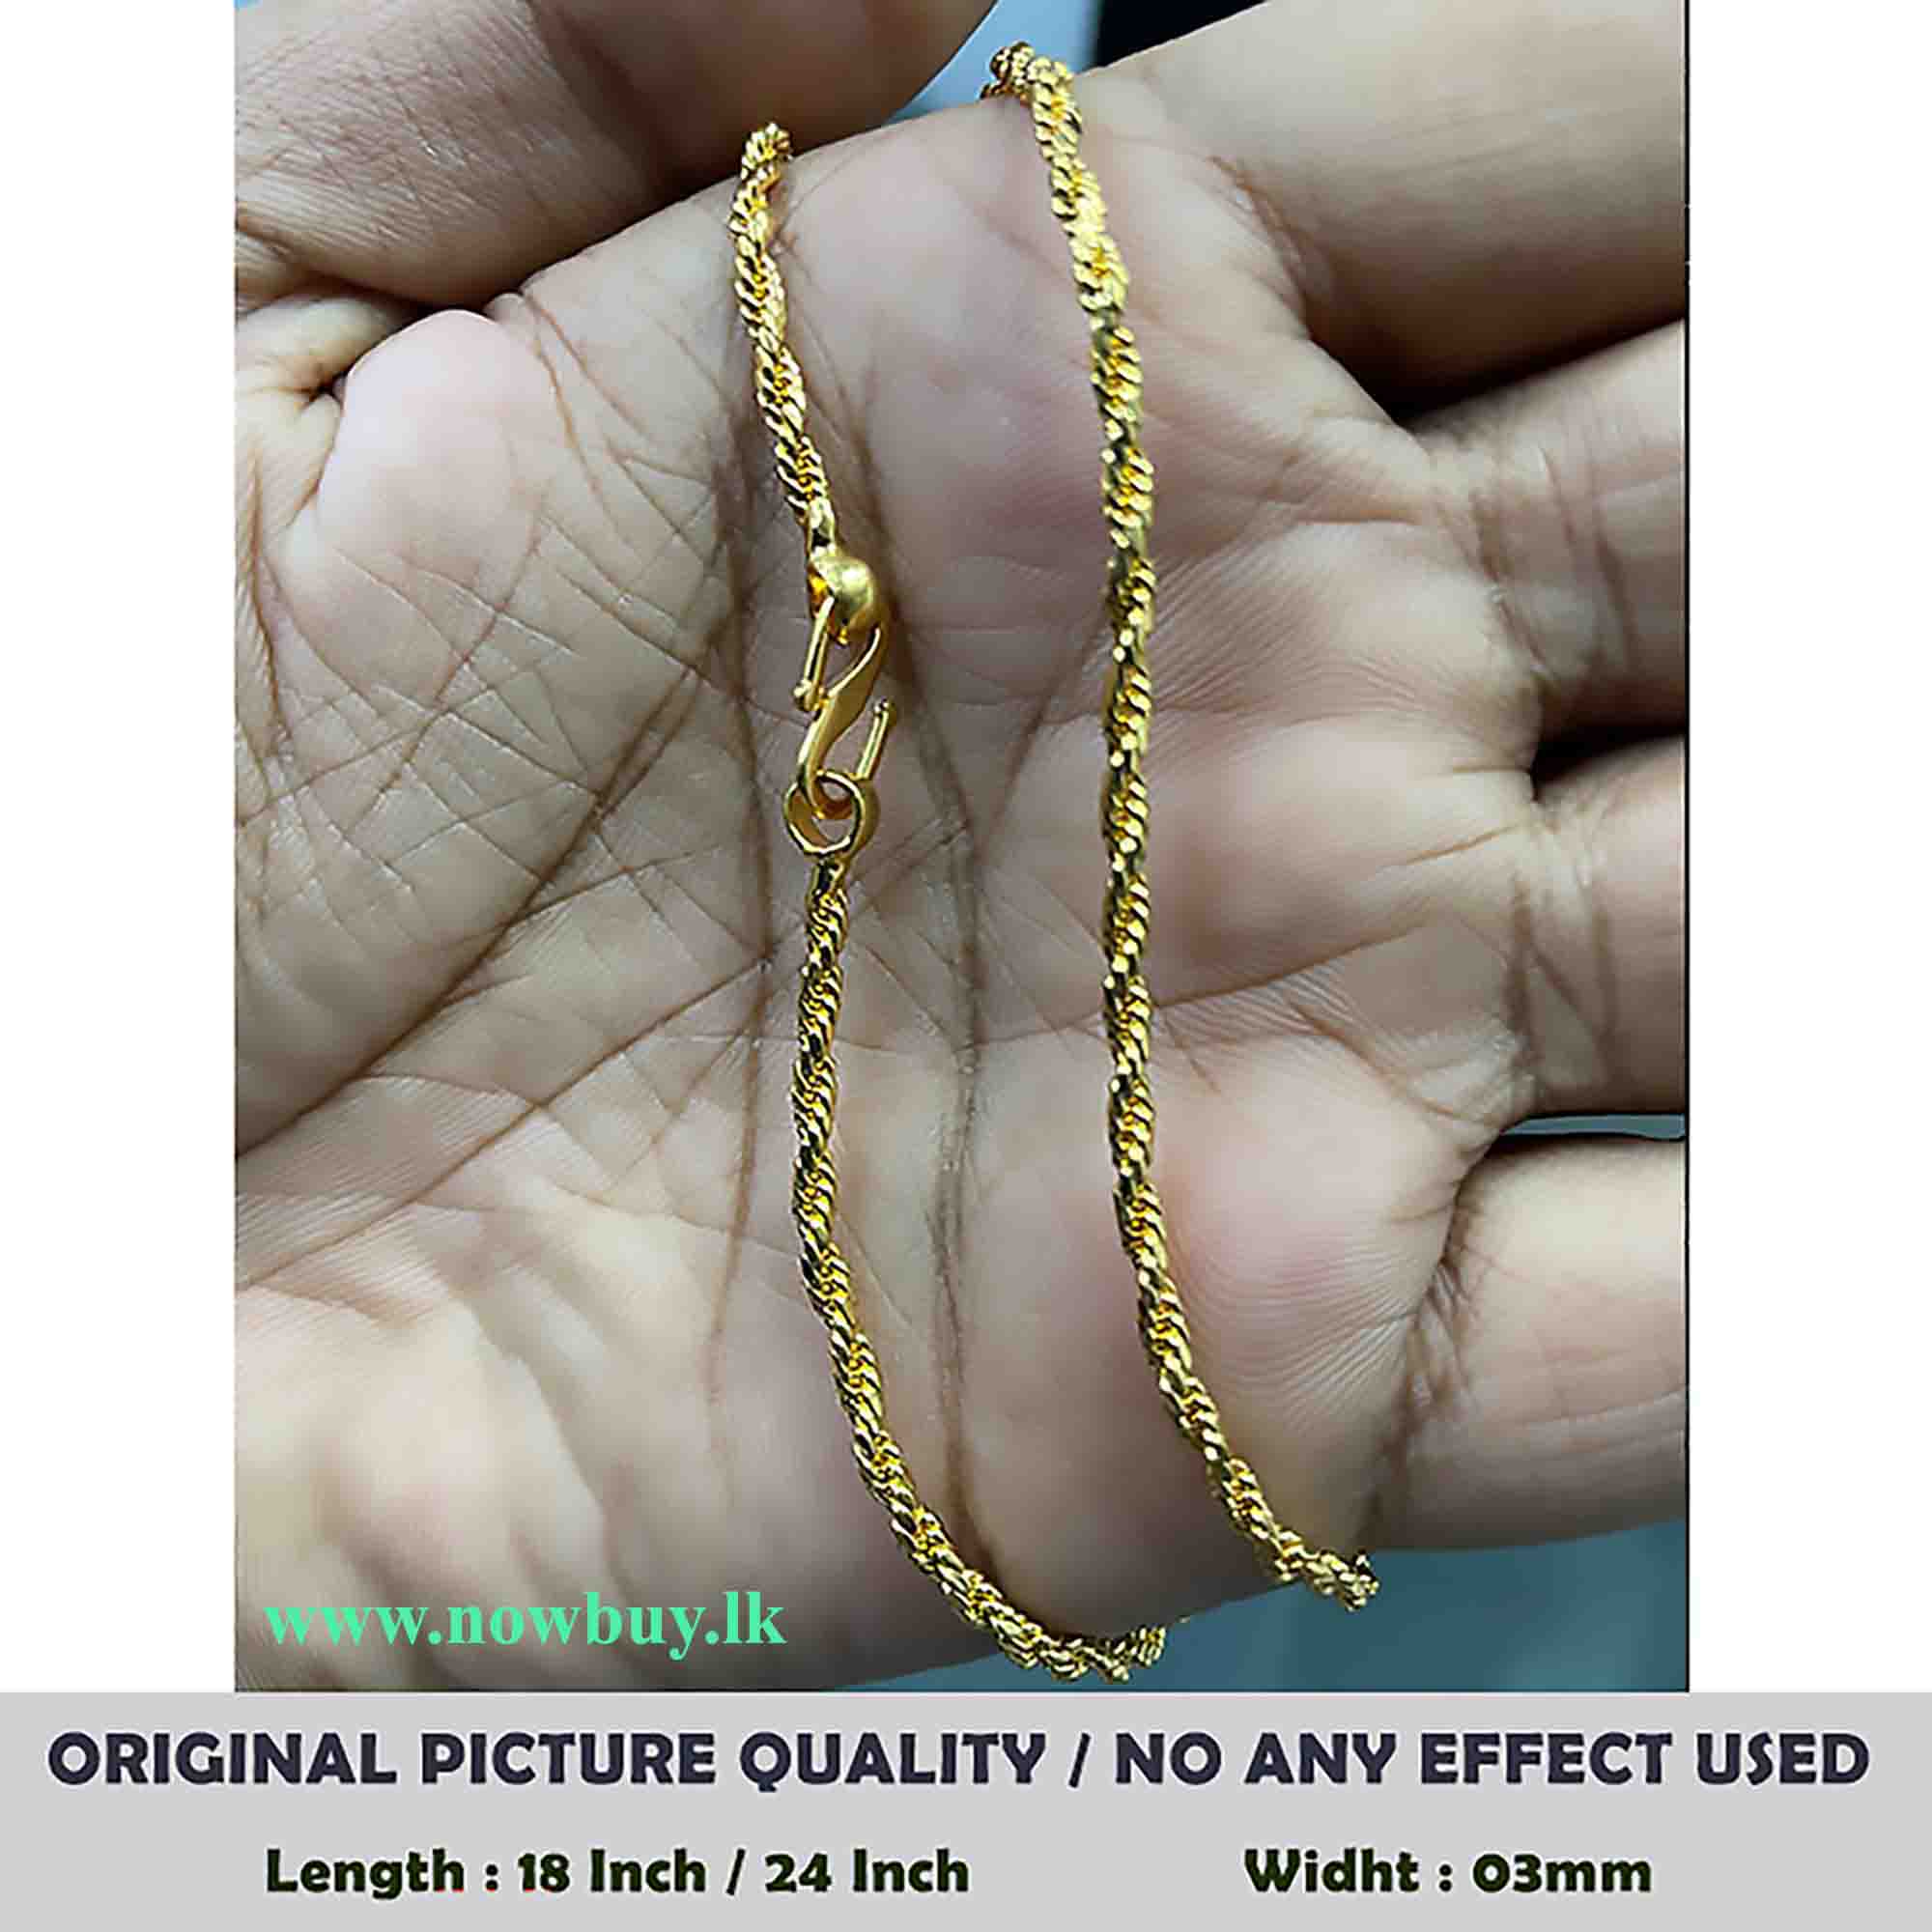 Gold Plated 02mm Rope Chain 18/24 Inch (NBLK) Necklaces NowBuy.lk 3